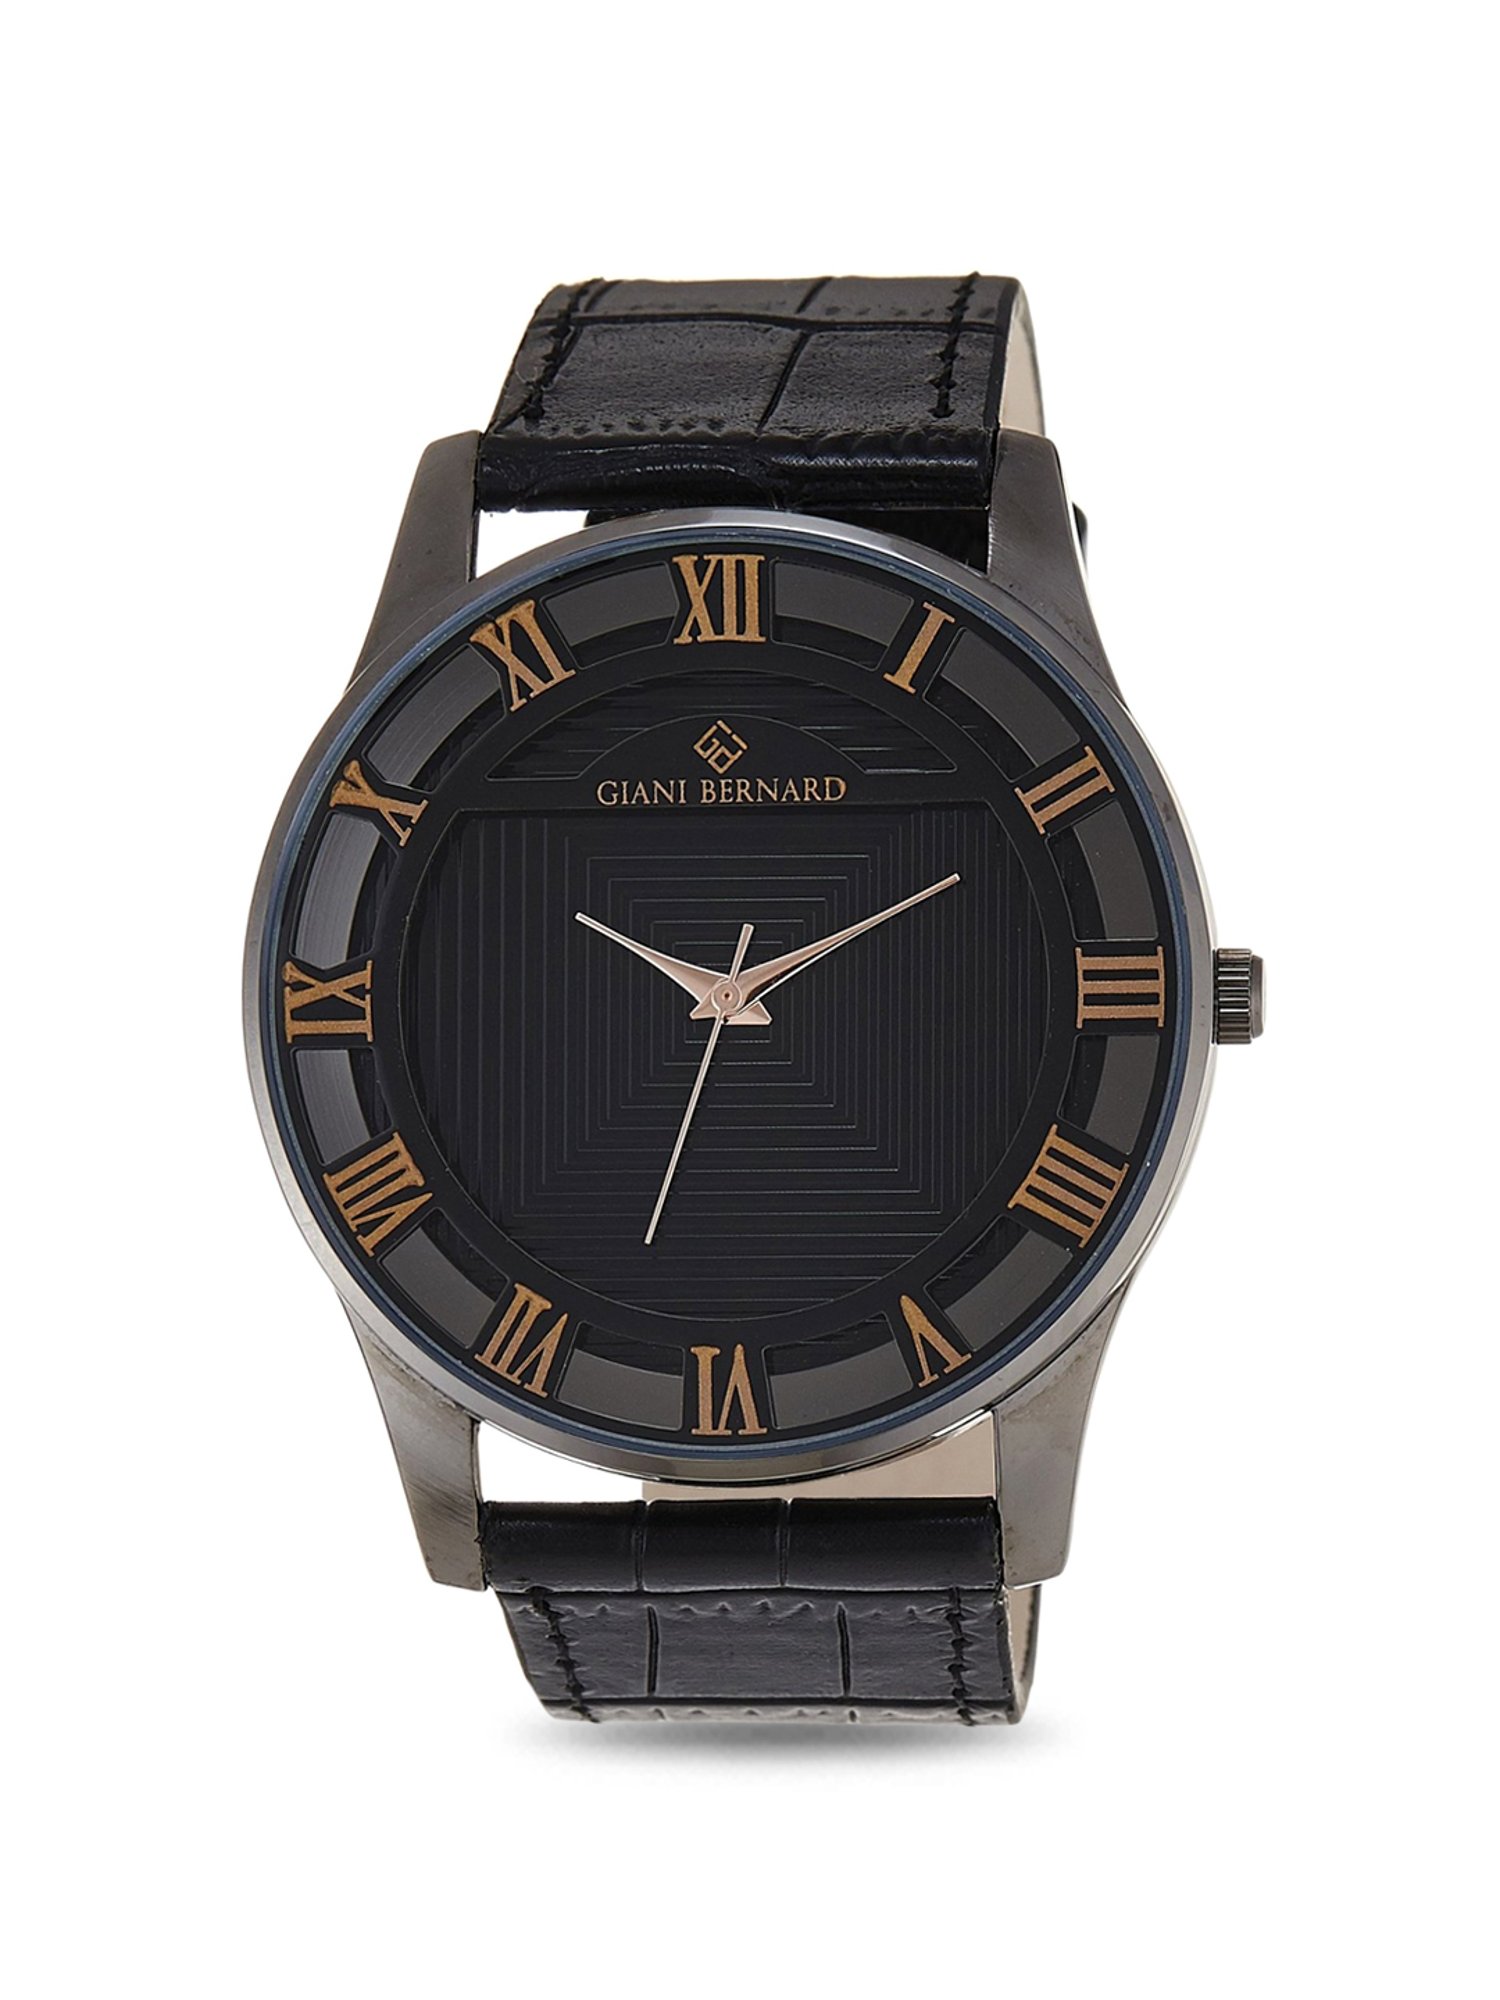 Buy Bernards Watch Book Online at Low Prices in India | Bernards Watch  Reviews & Ratings - Amazon.in